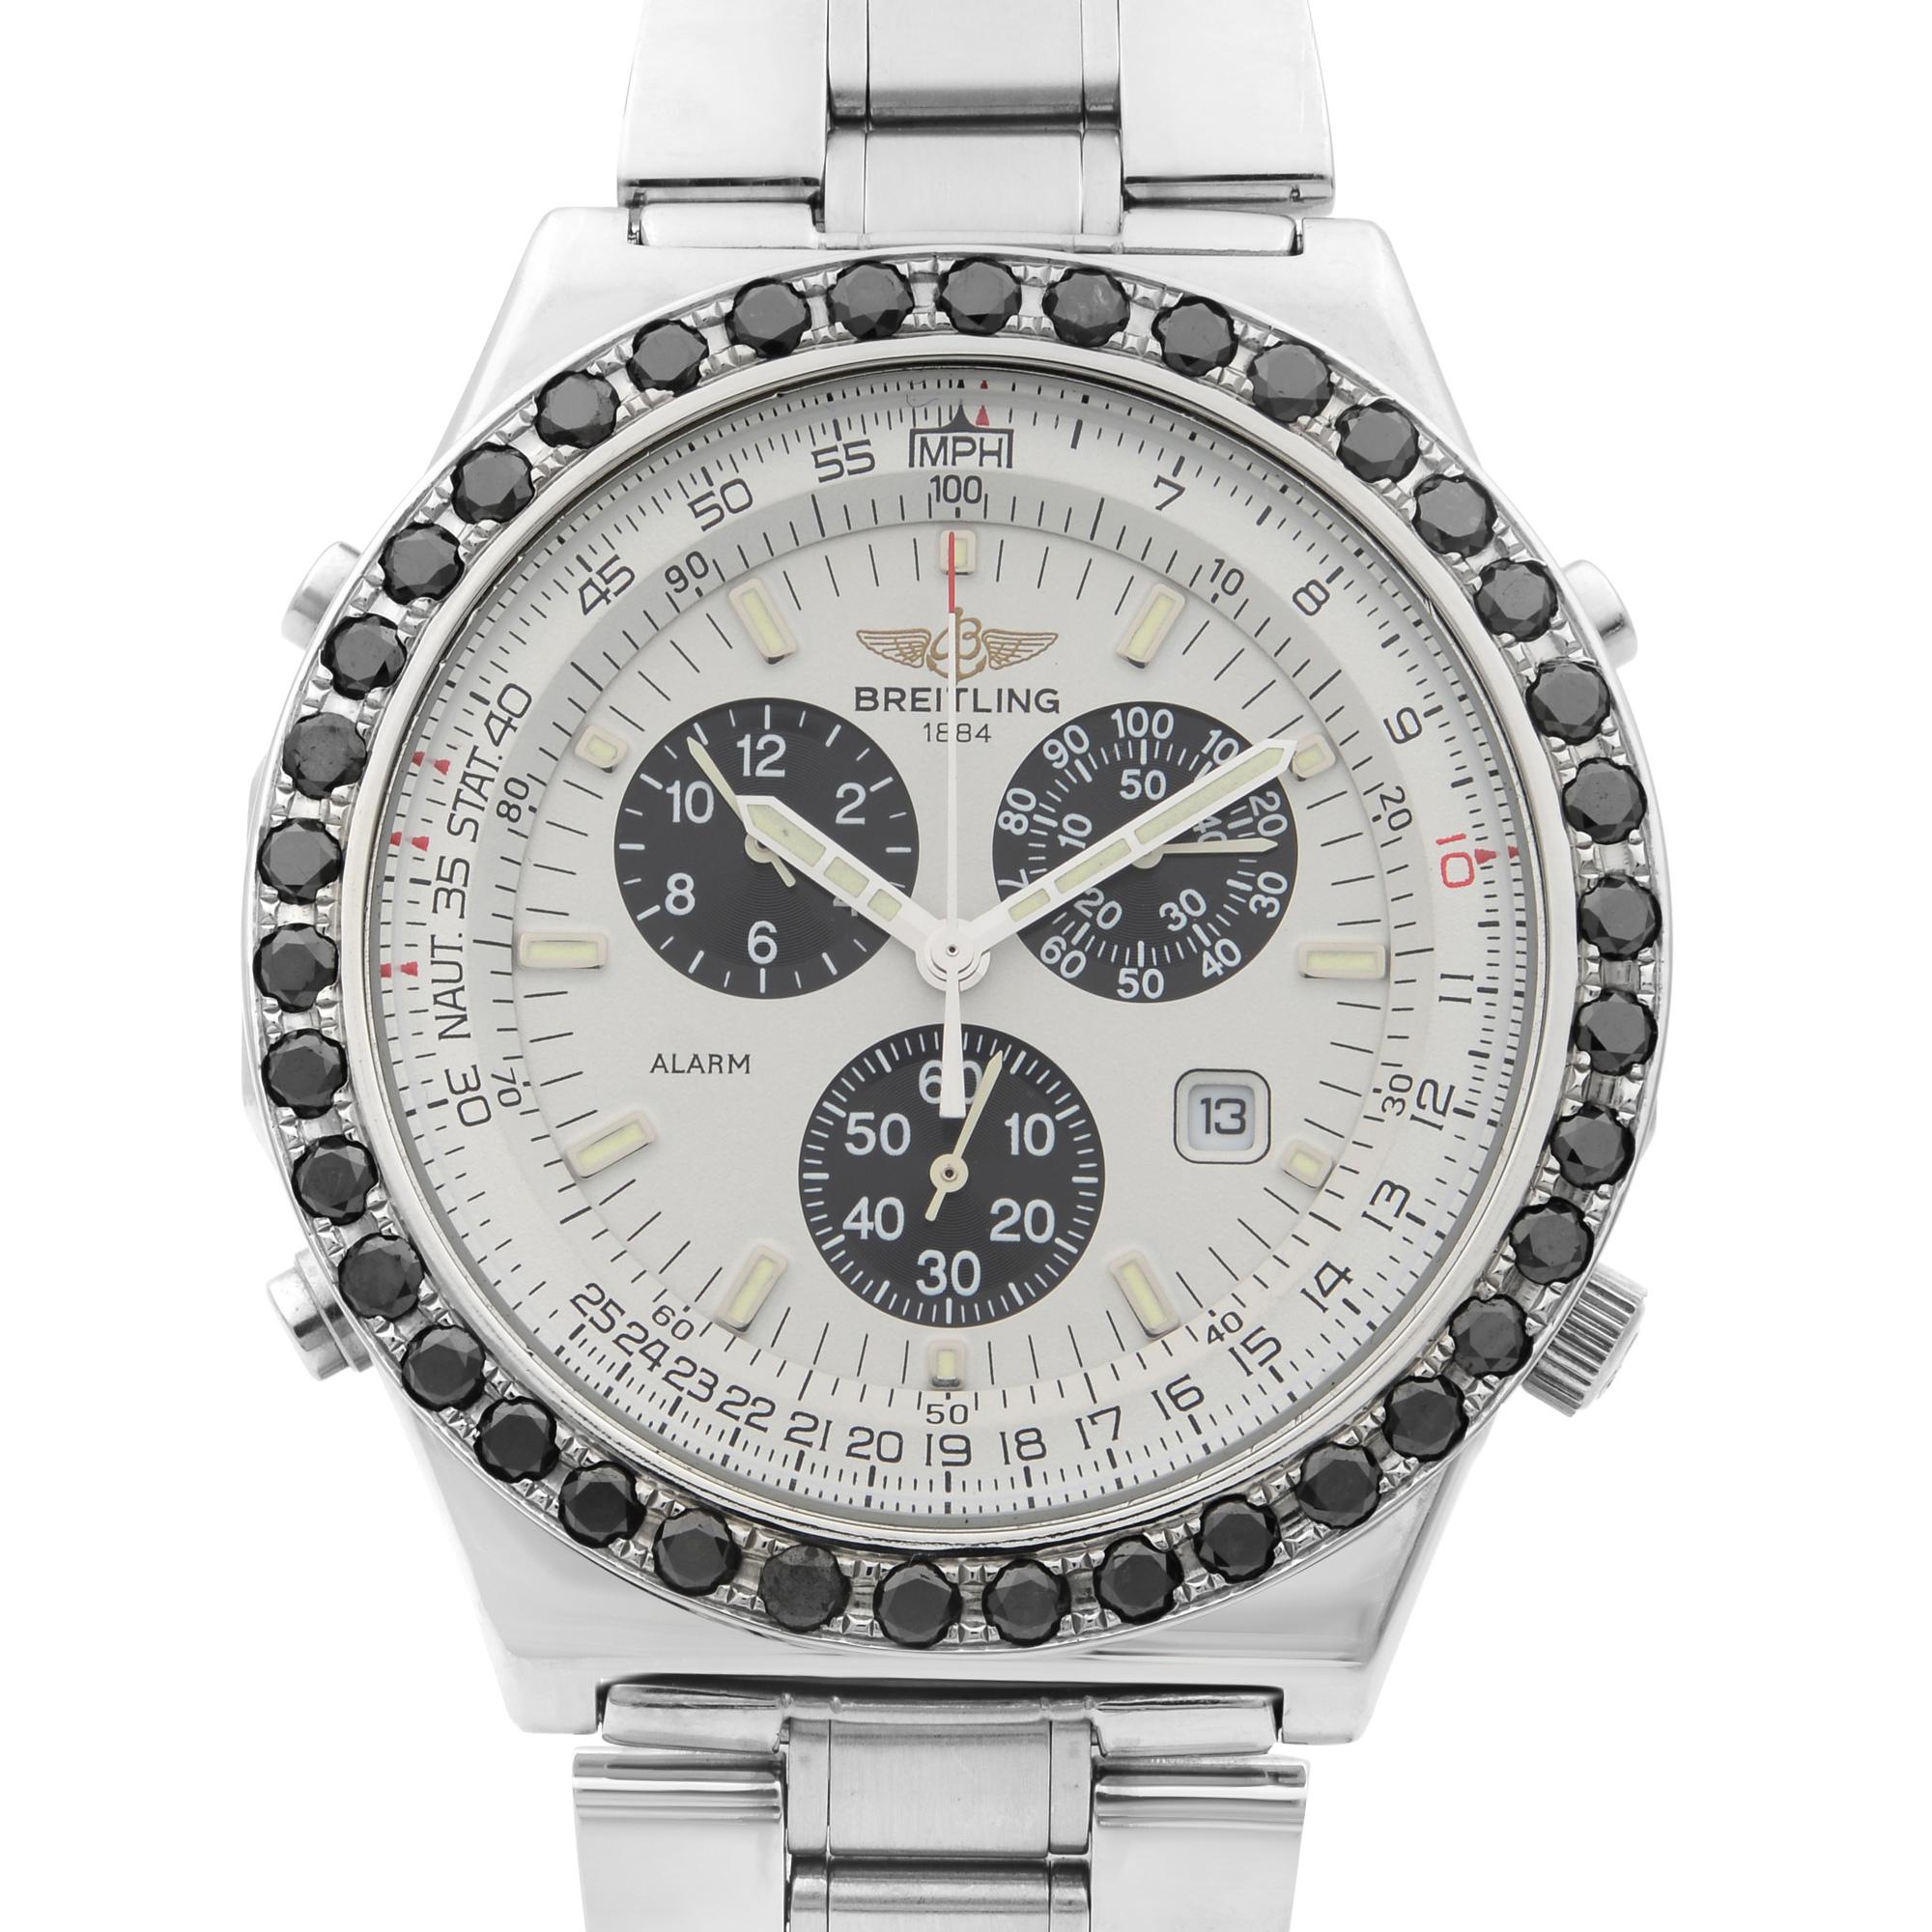 This pre-owned Breitling Jupiter Pilot A59028  is a beautiful men's timepiece that is powered by quartz (battery) movement which is cased in a stainless steel case. It has a round shape face, chronograph, date indicator, small seconds subdial dial